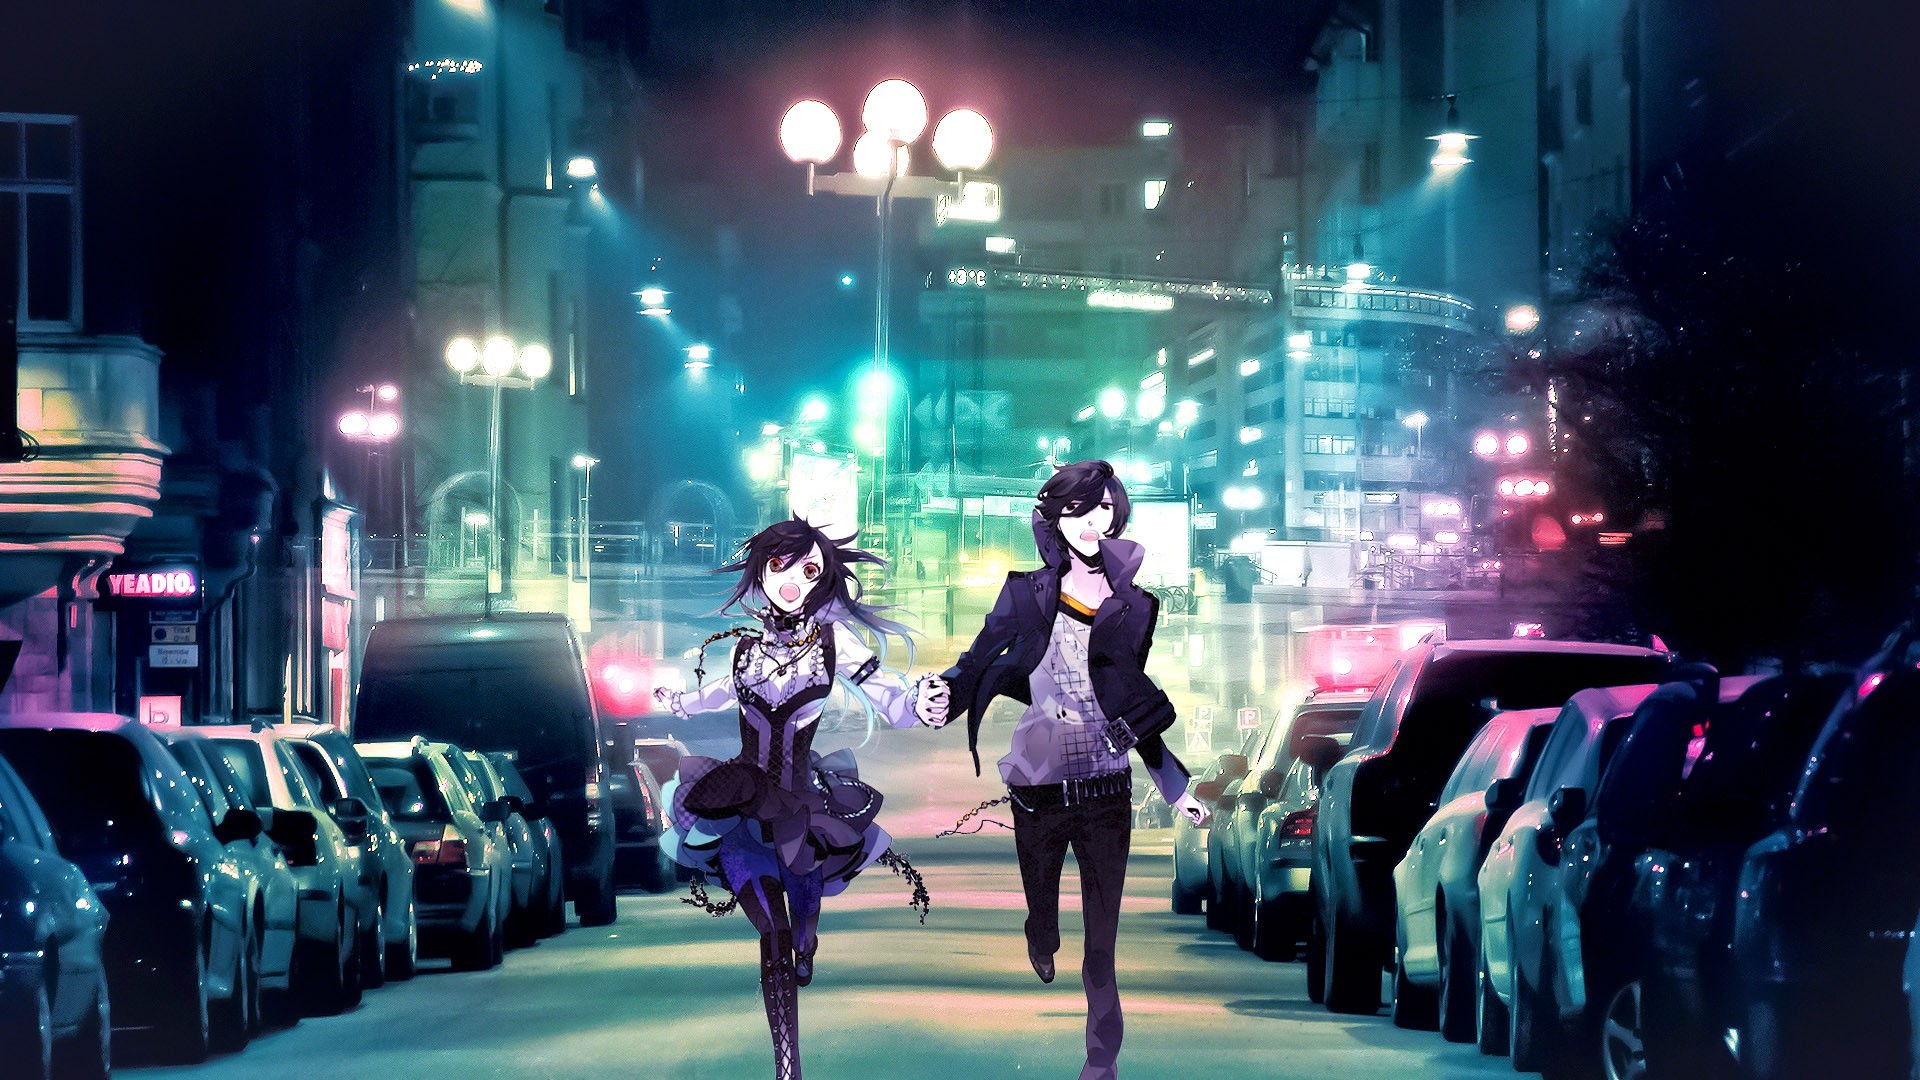 Page 19 | Aesthetic Anime Wallpaper Images - Free Download on Freepik